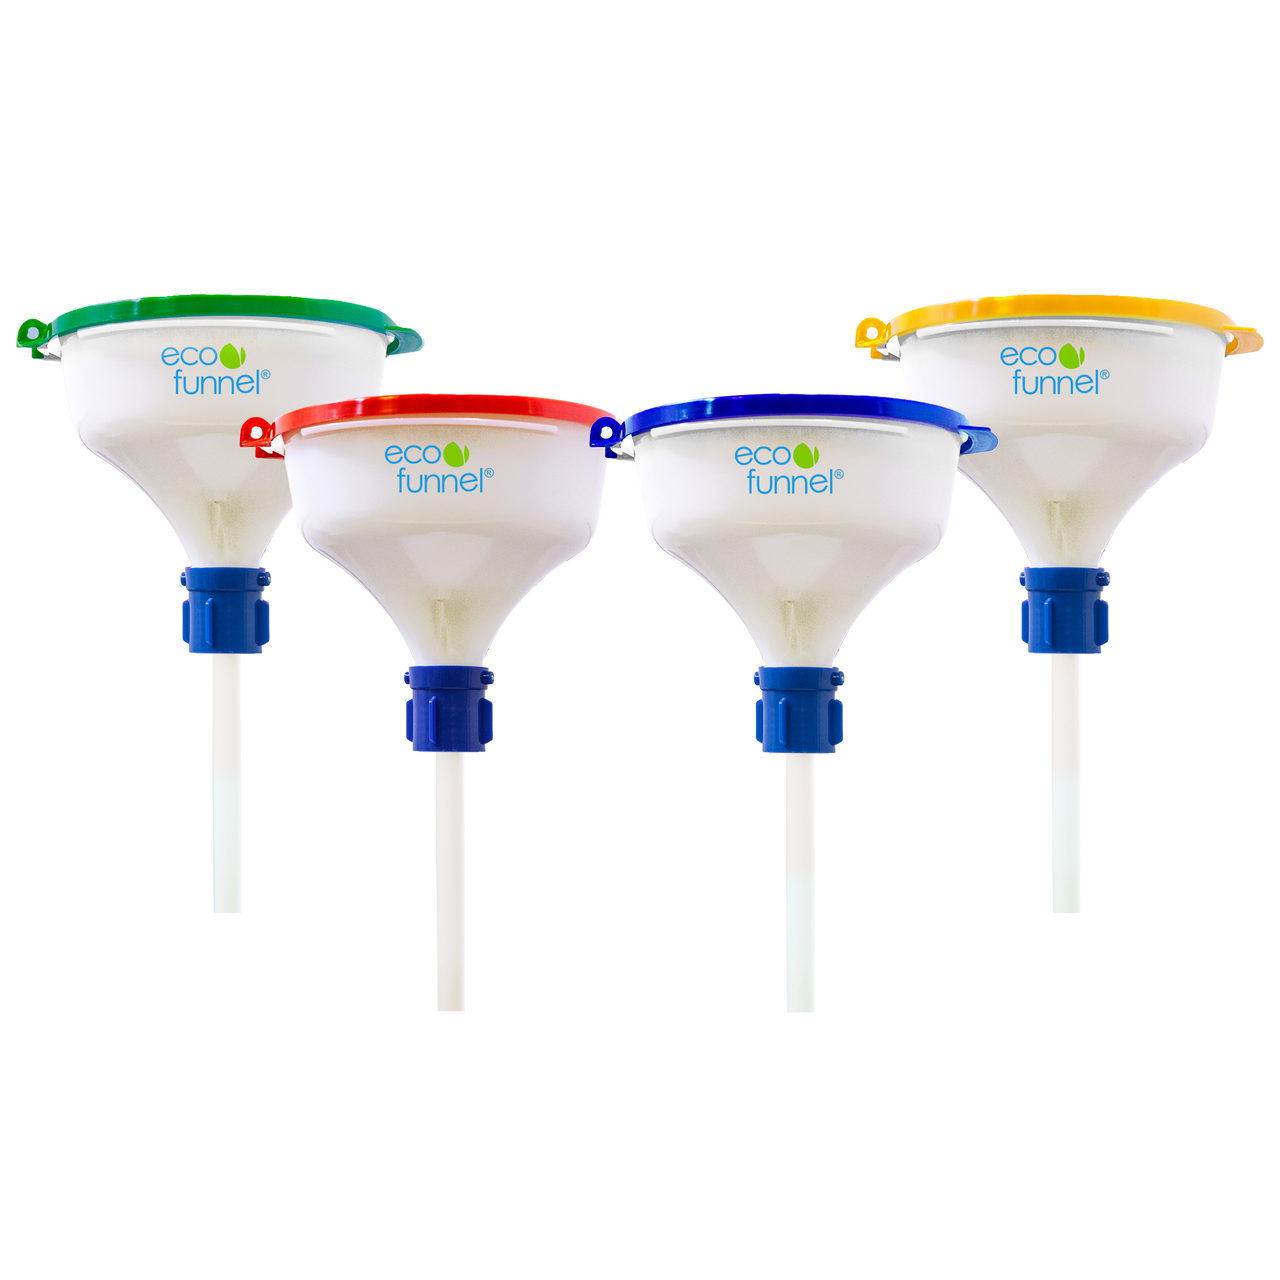 8 ECO Funnel® with 38mm cap adapter for 38-430 or GL38 bottles